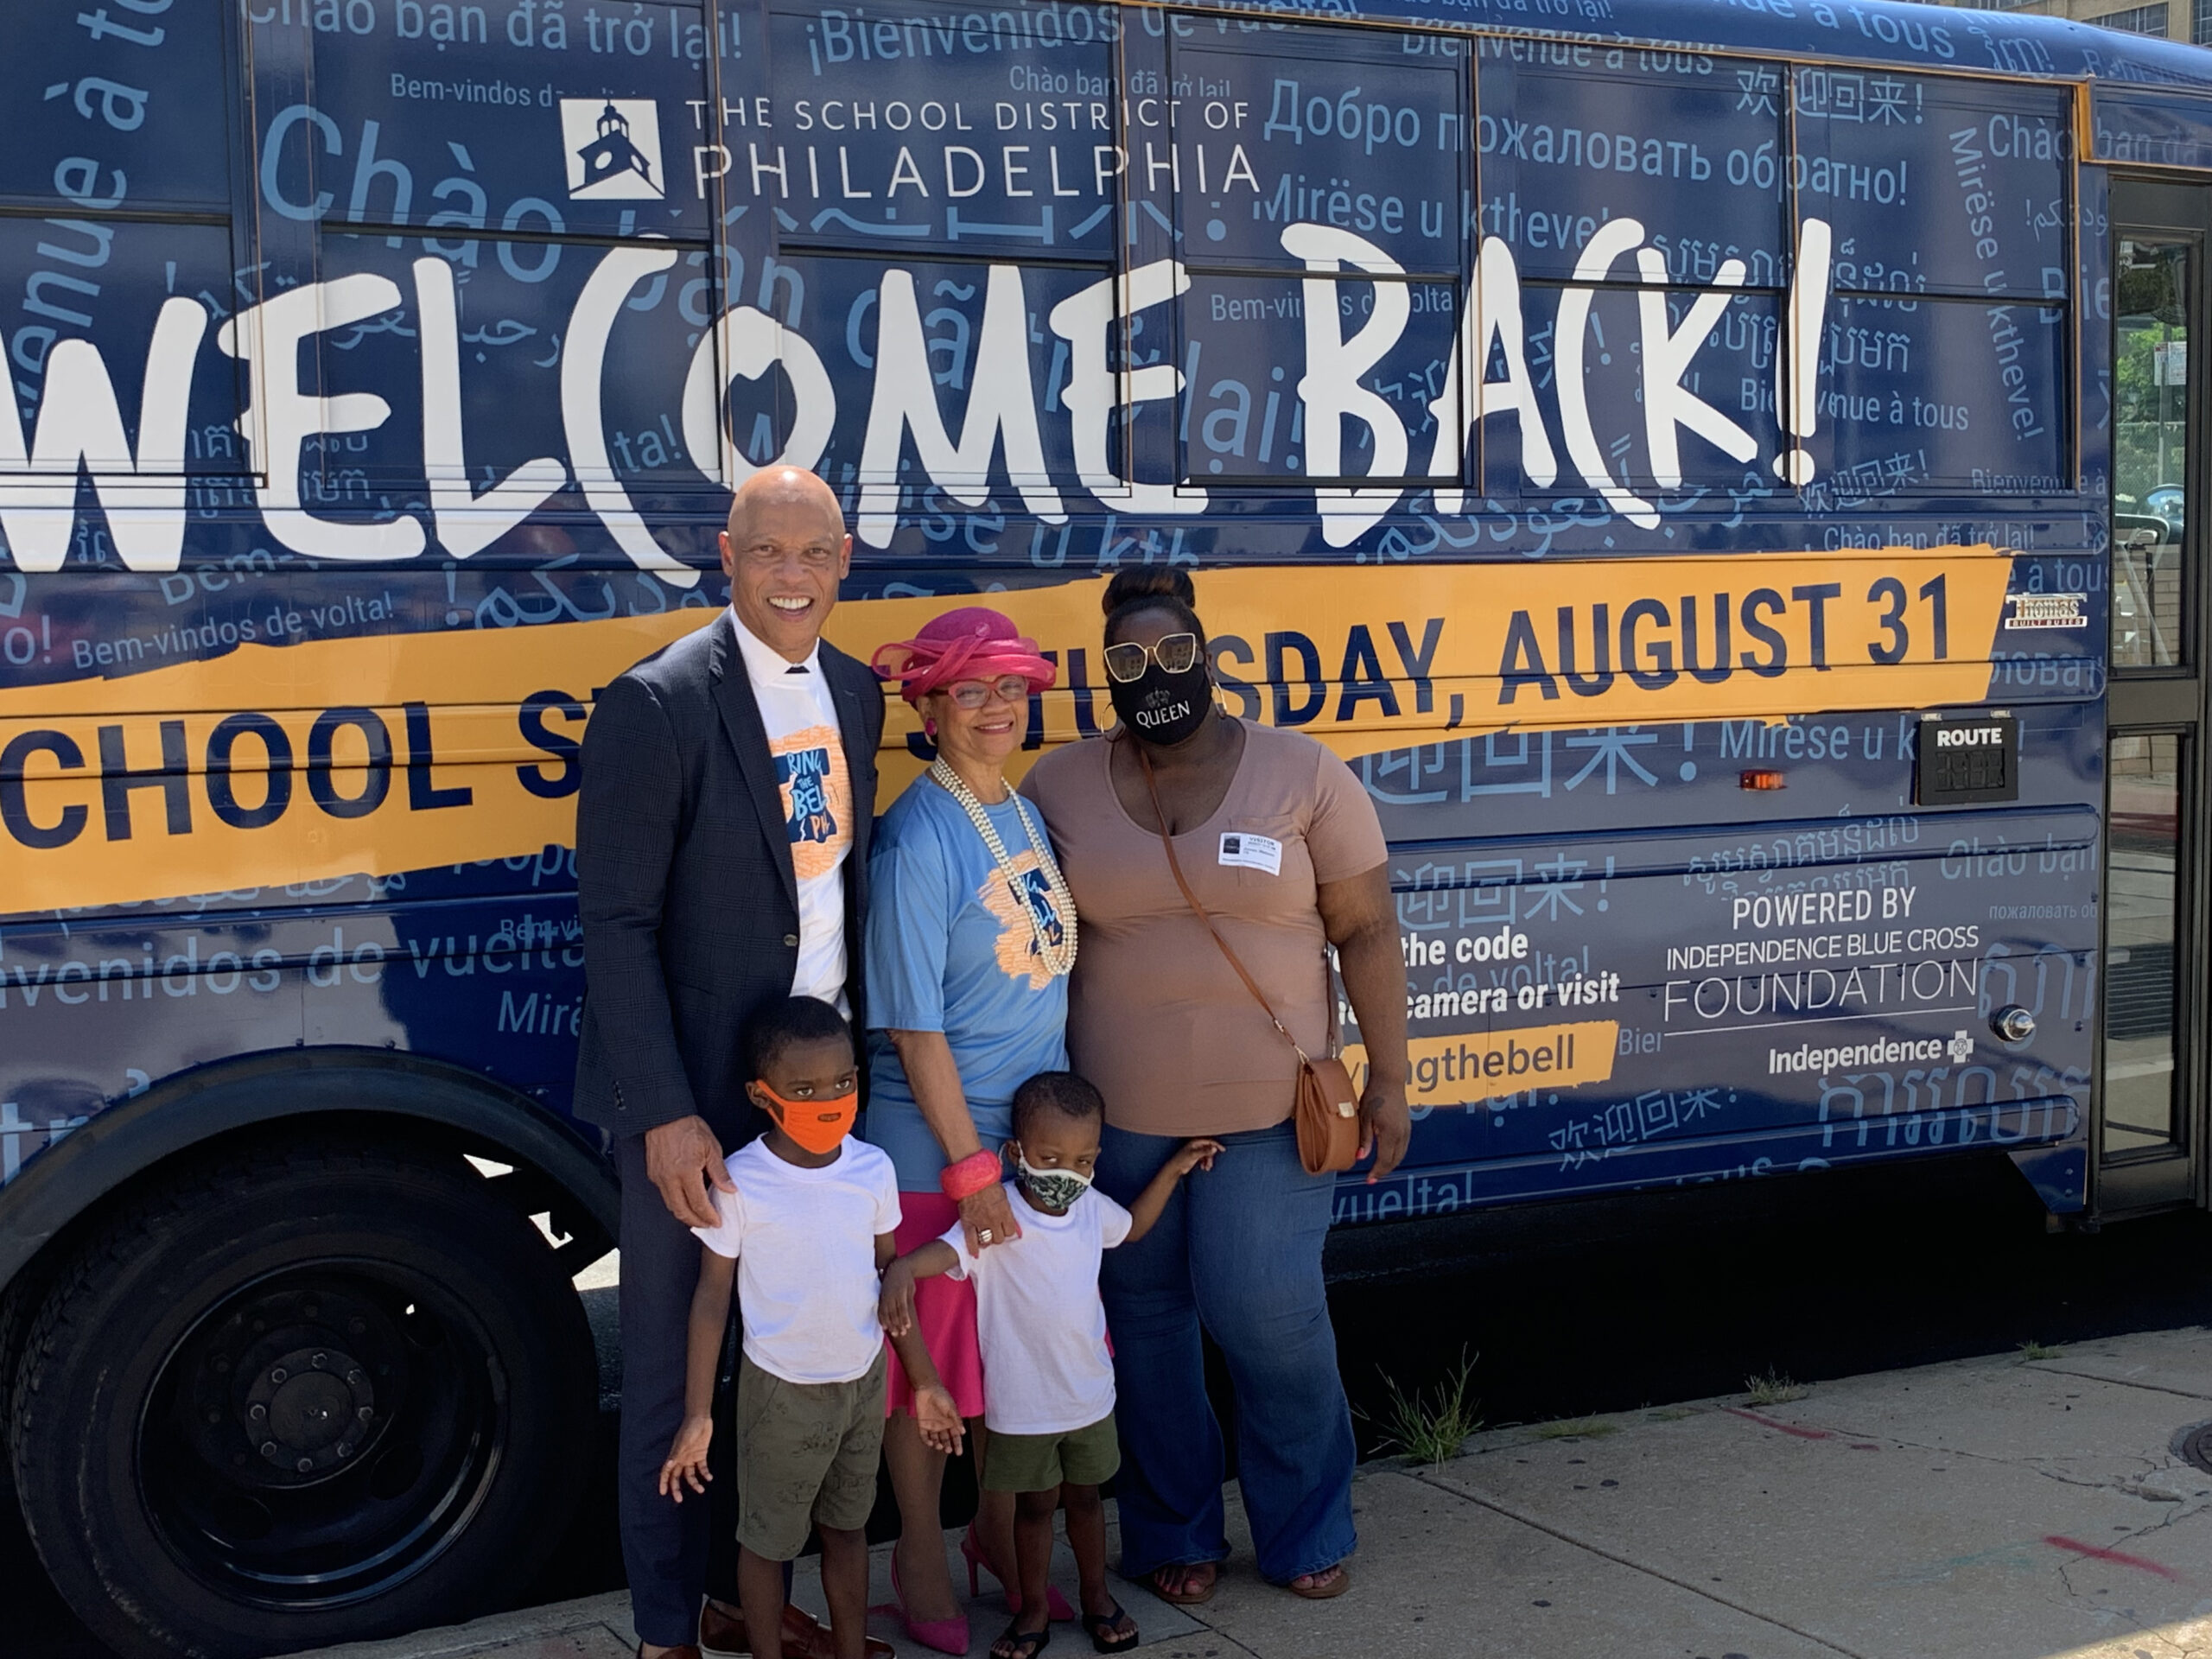 Philly school district hosts back-to-school tour